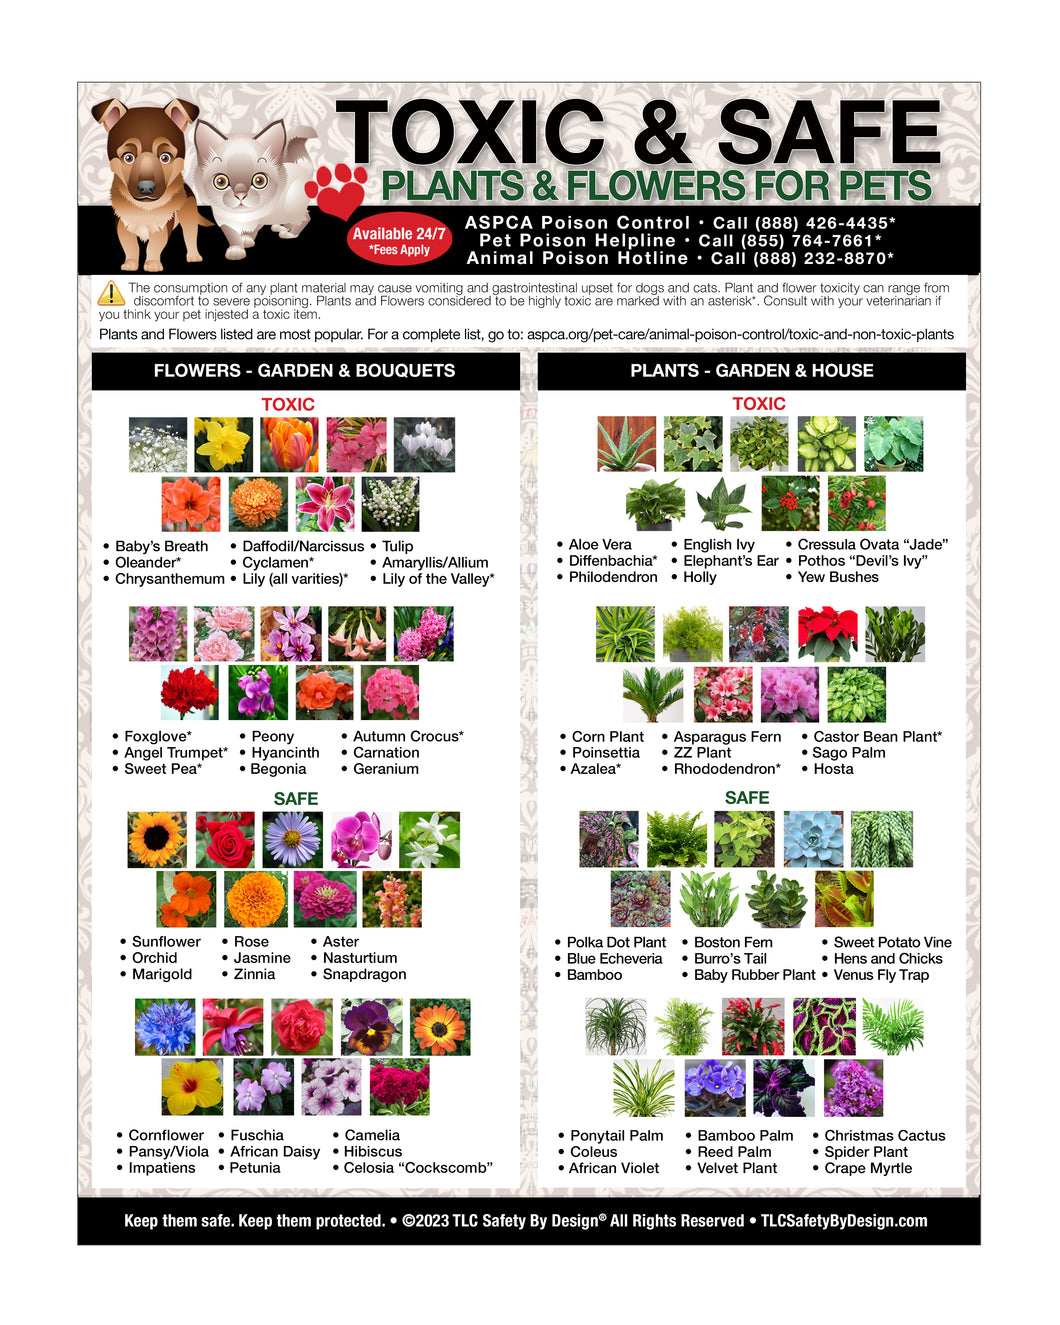 TOXIC and SAFE PLANTS & FLOWERS Large Format 8.5